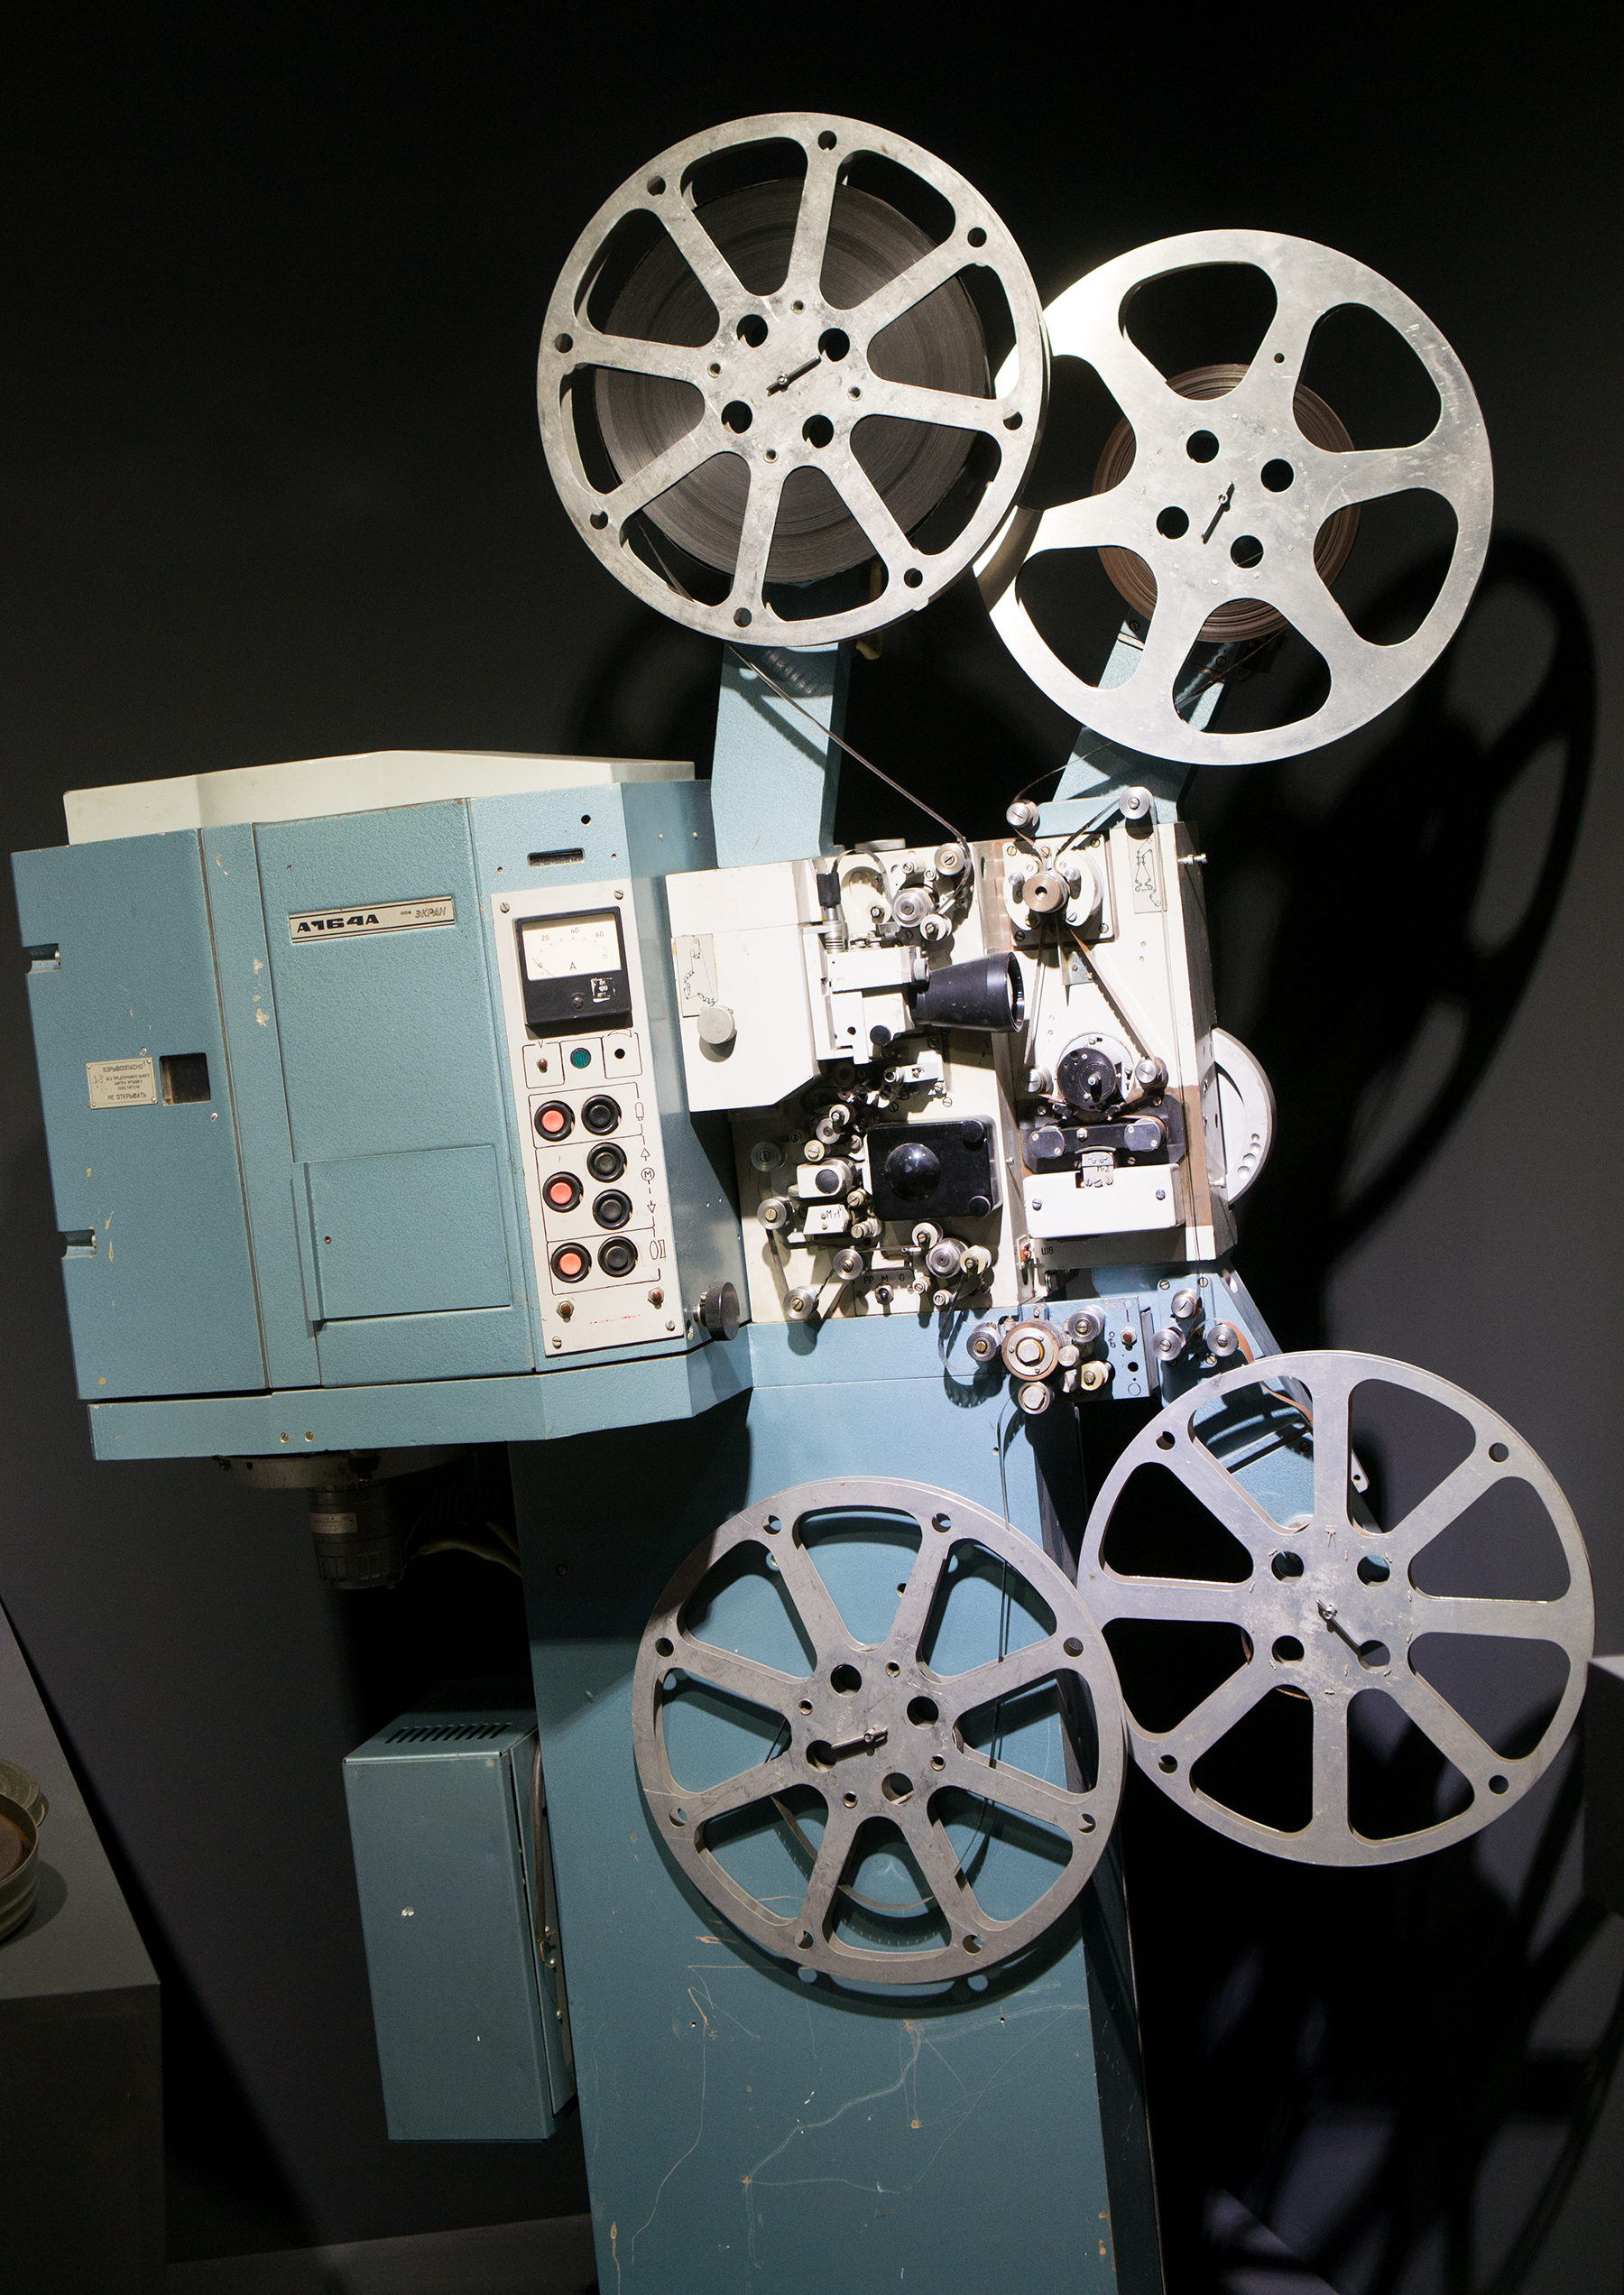 https://upload.wikimedia.org/wikipedia/commons/d/d3/A164A_movie_projector.jpg